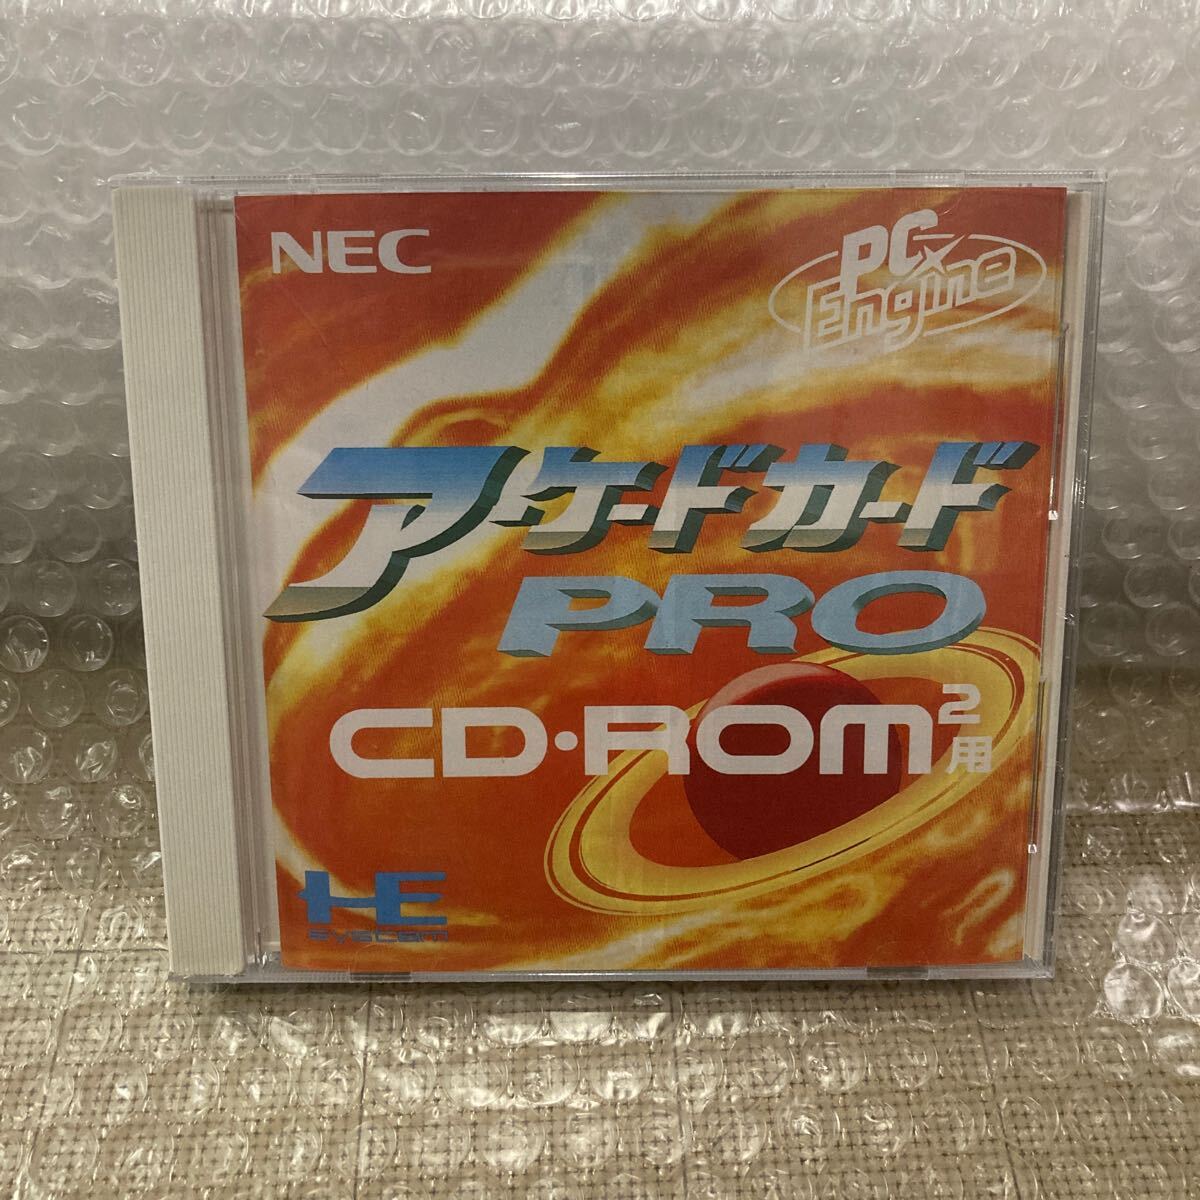  unopened [ PC engine ] arcade card Pro(PC) PC engine PCE PRO dead stock shrink attaching 